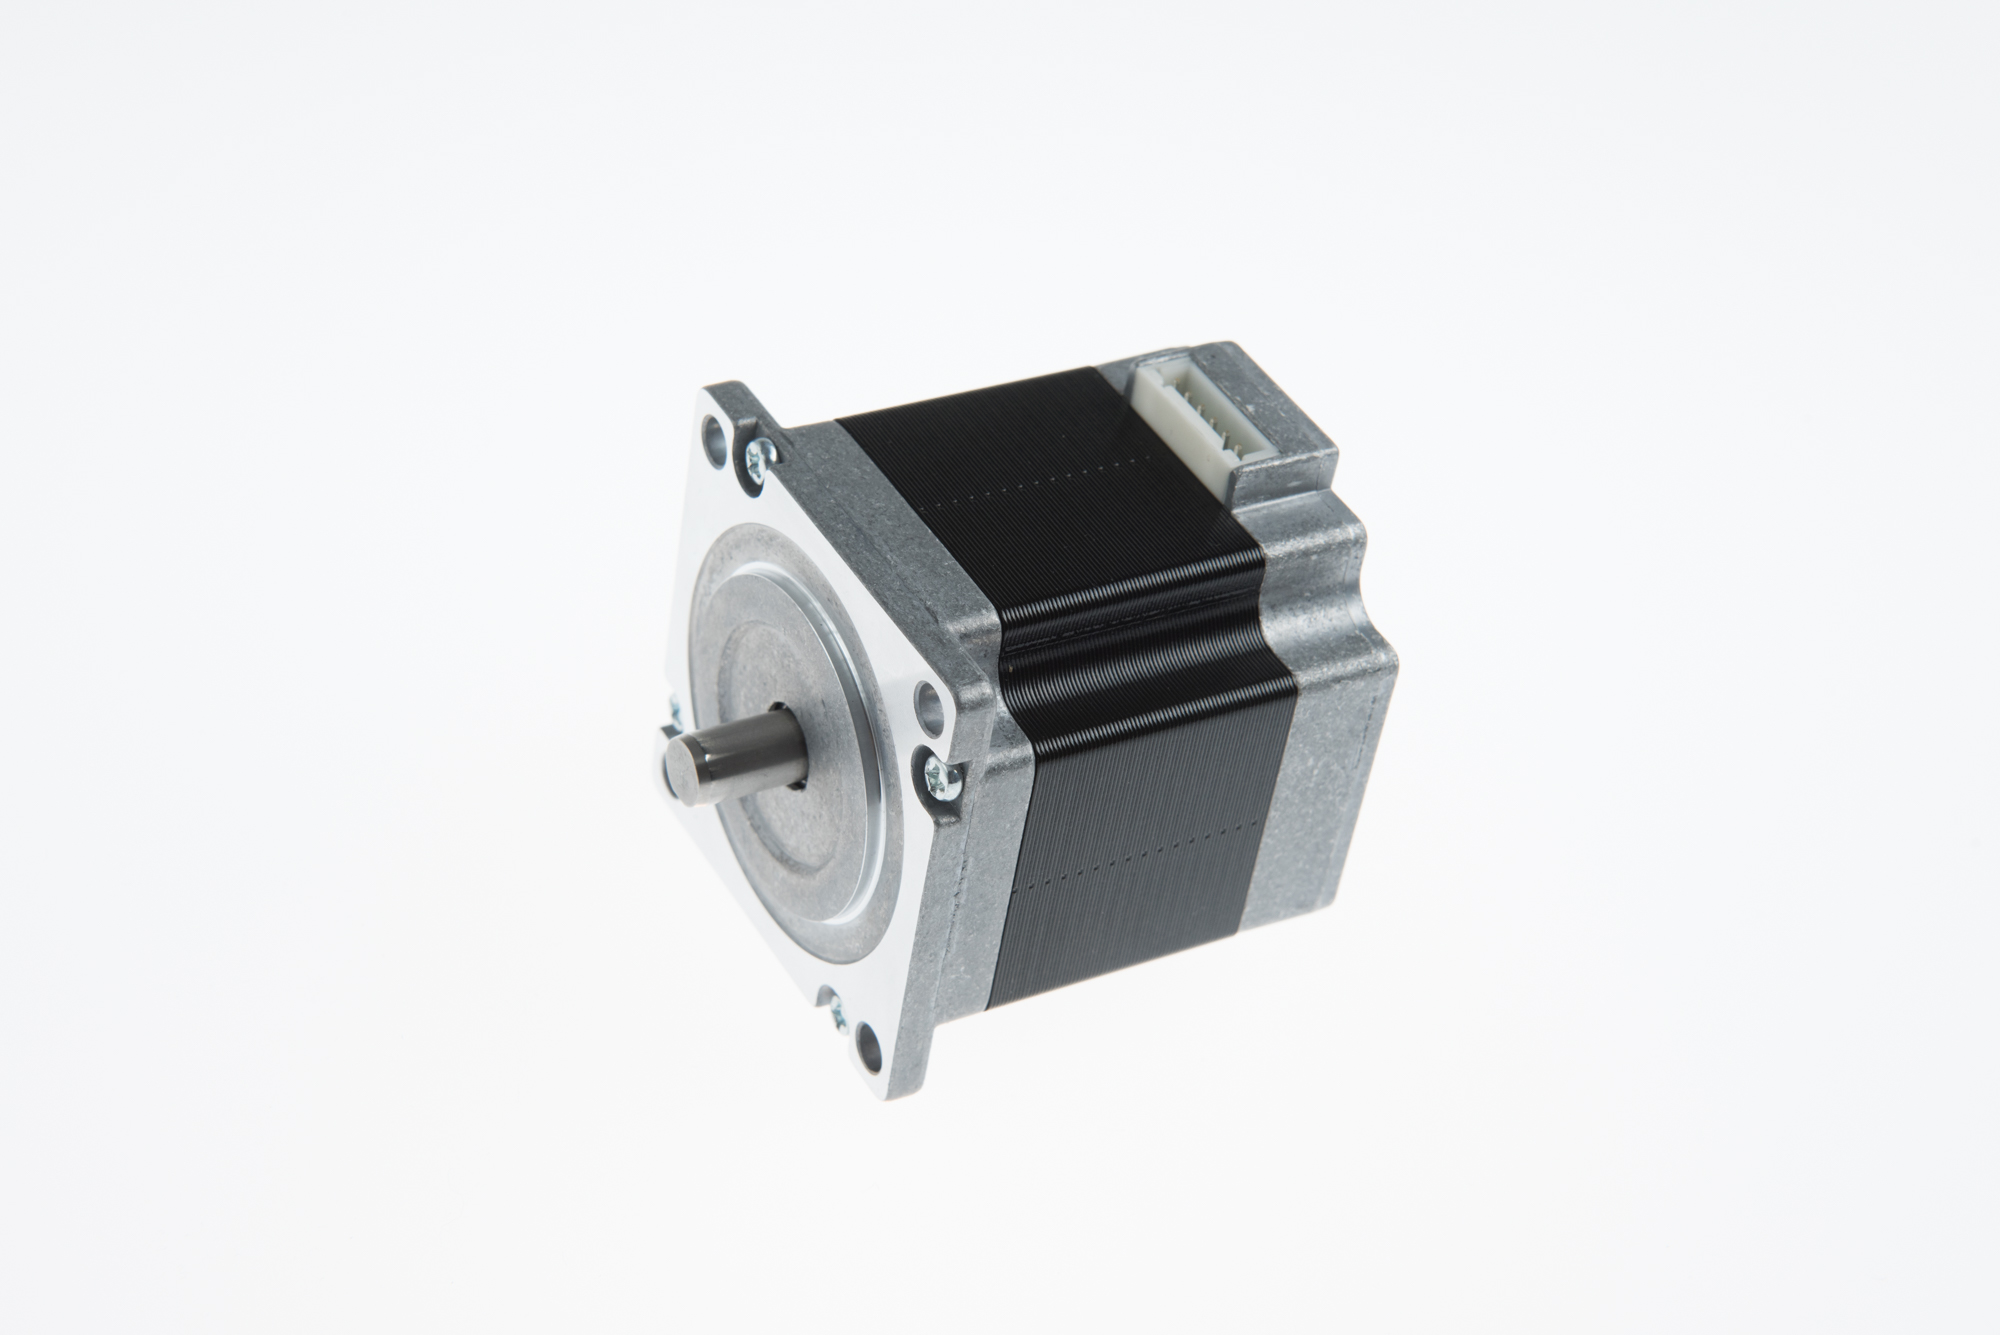 Manufacturing Companies for 86mm 3 Phase Hybrid Stepper Motor -
 NEMA 23 step angel 0.9 degree connector type hybrid stepping motor (55mm 0.8N.m ) – PROSTEPPER